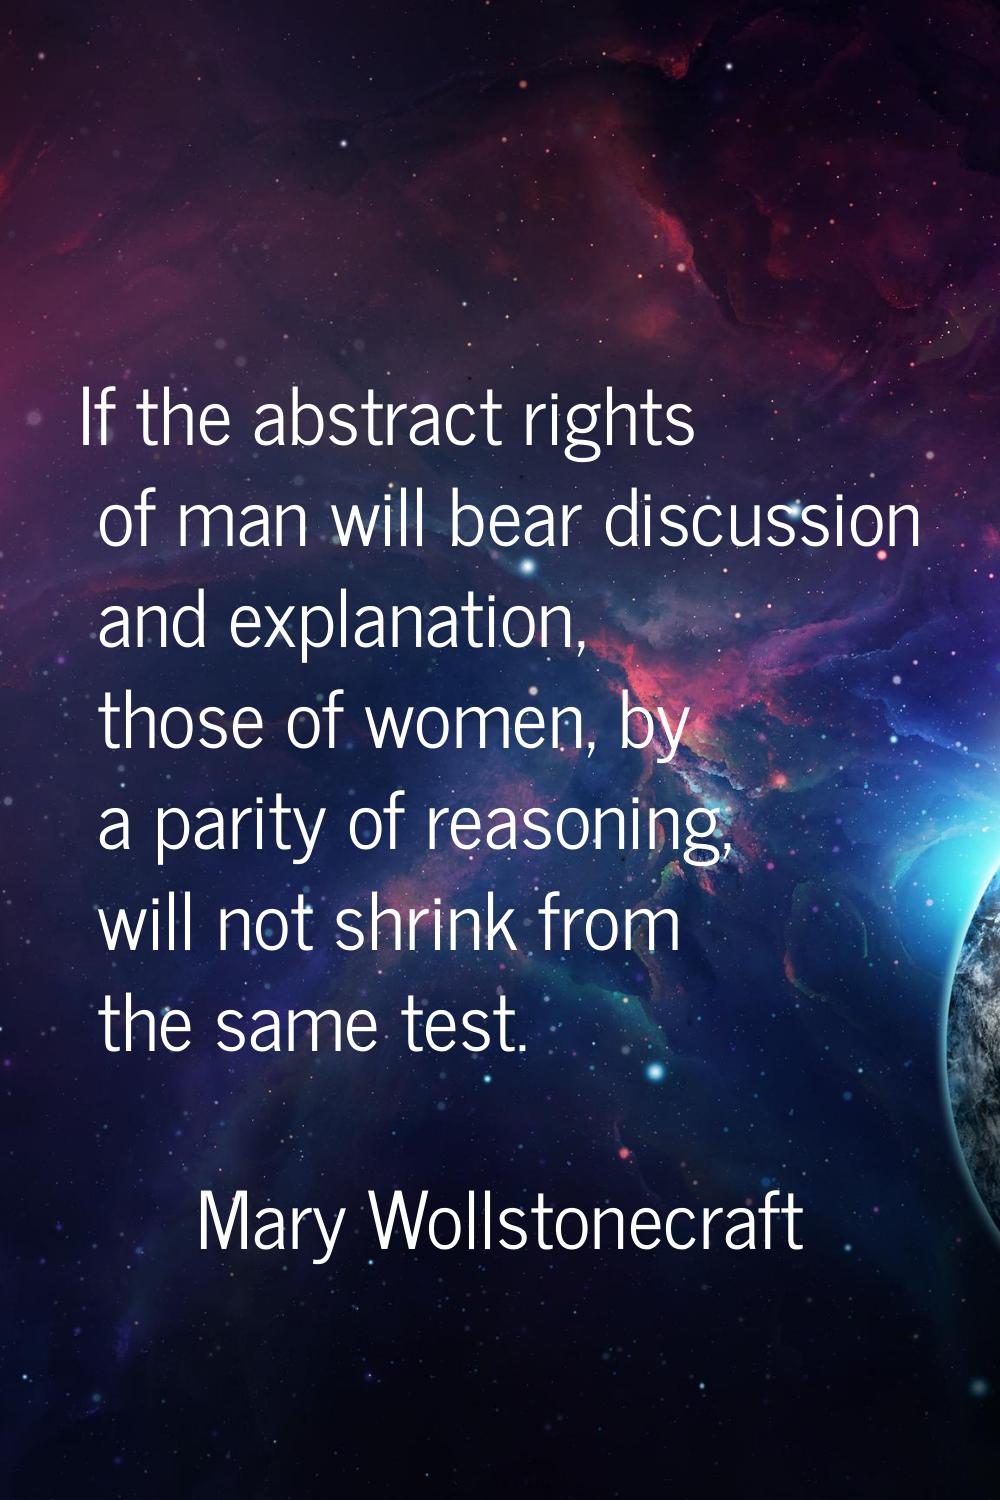 If the abstract rights of man will bear discussion and explanation, those of women, by a parity of 